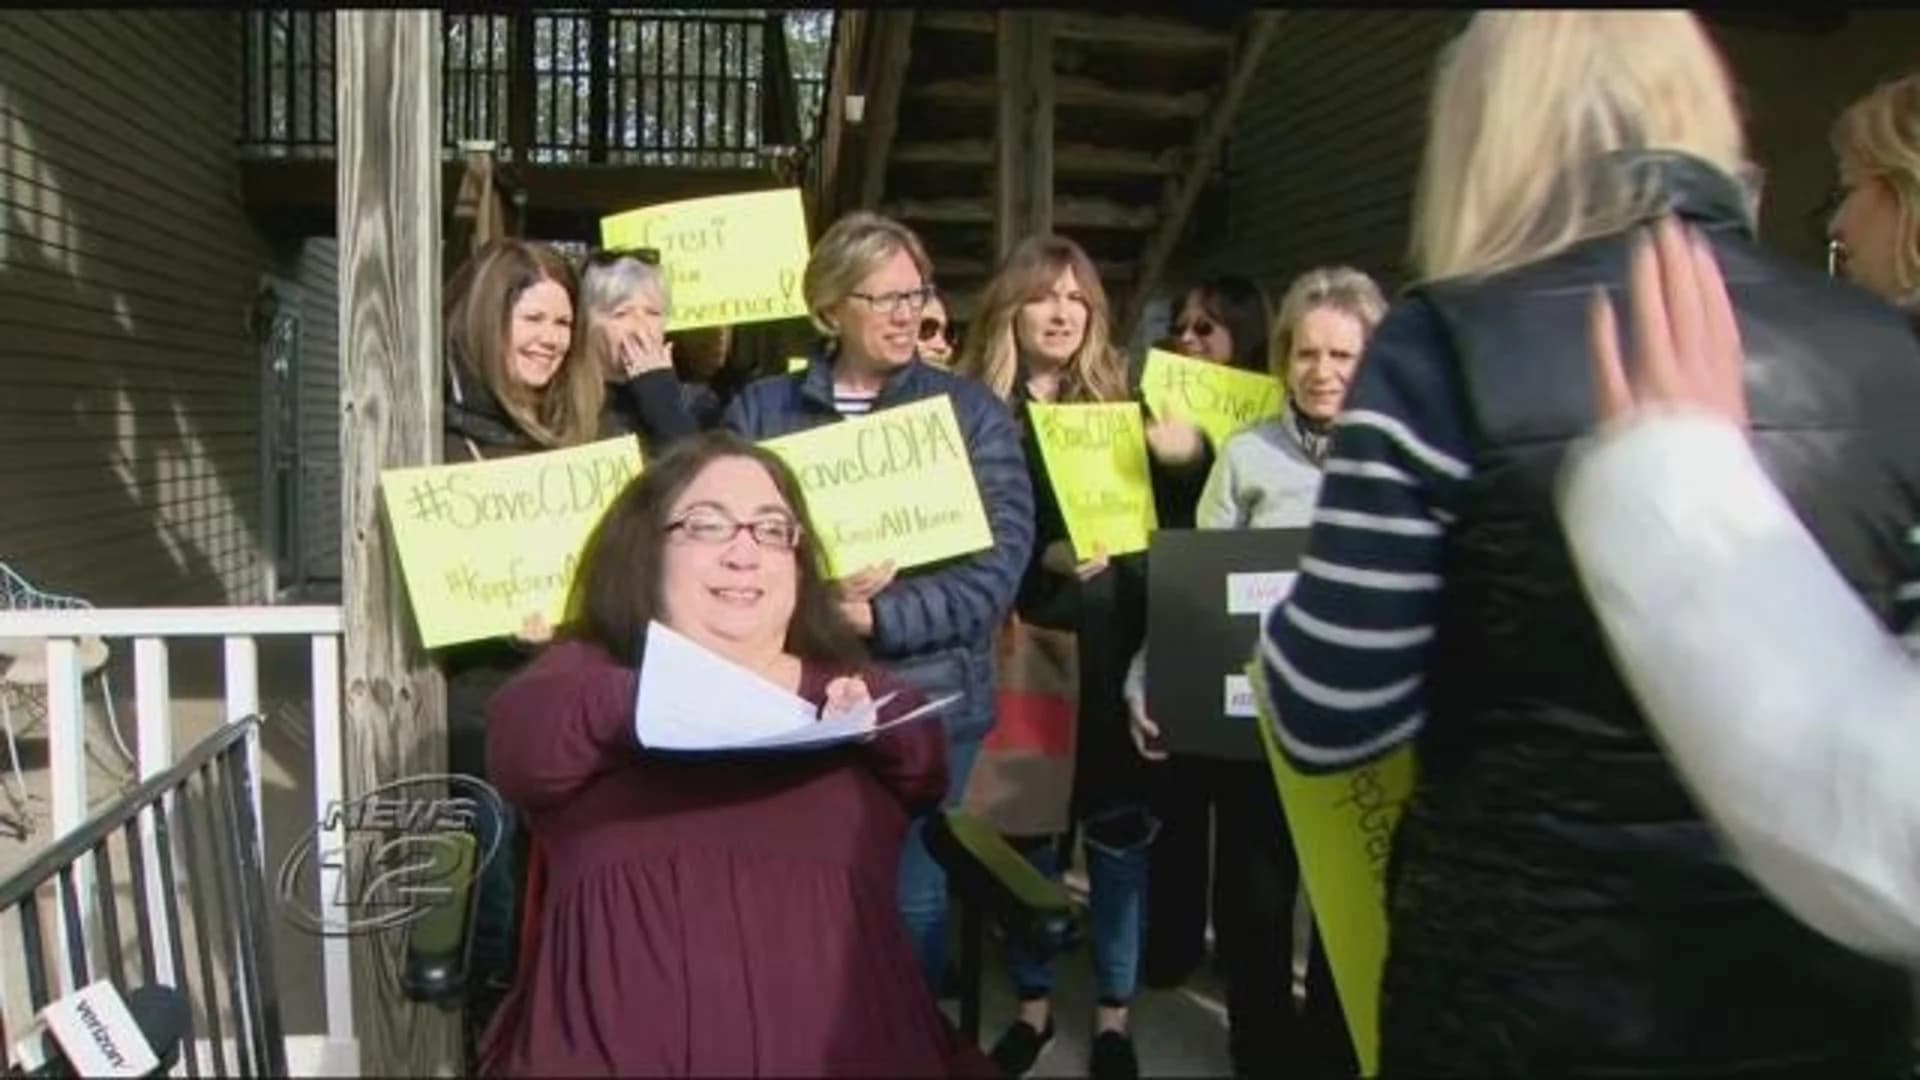 Protesters: $75M in cuts to CDPAP will hurt people with disabilities